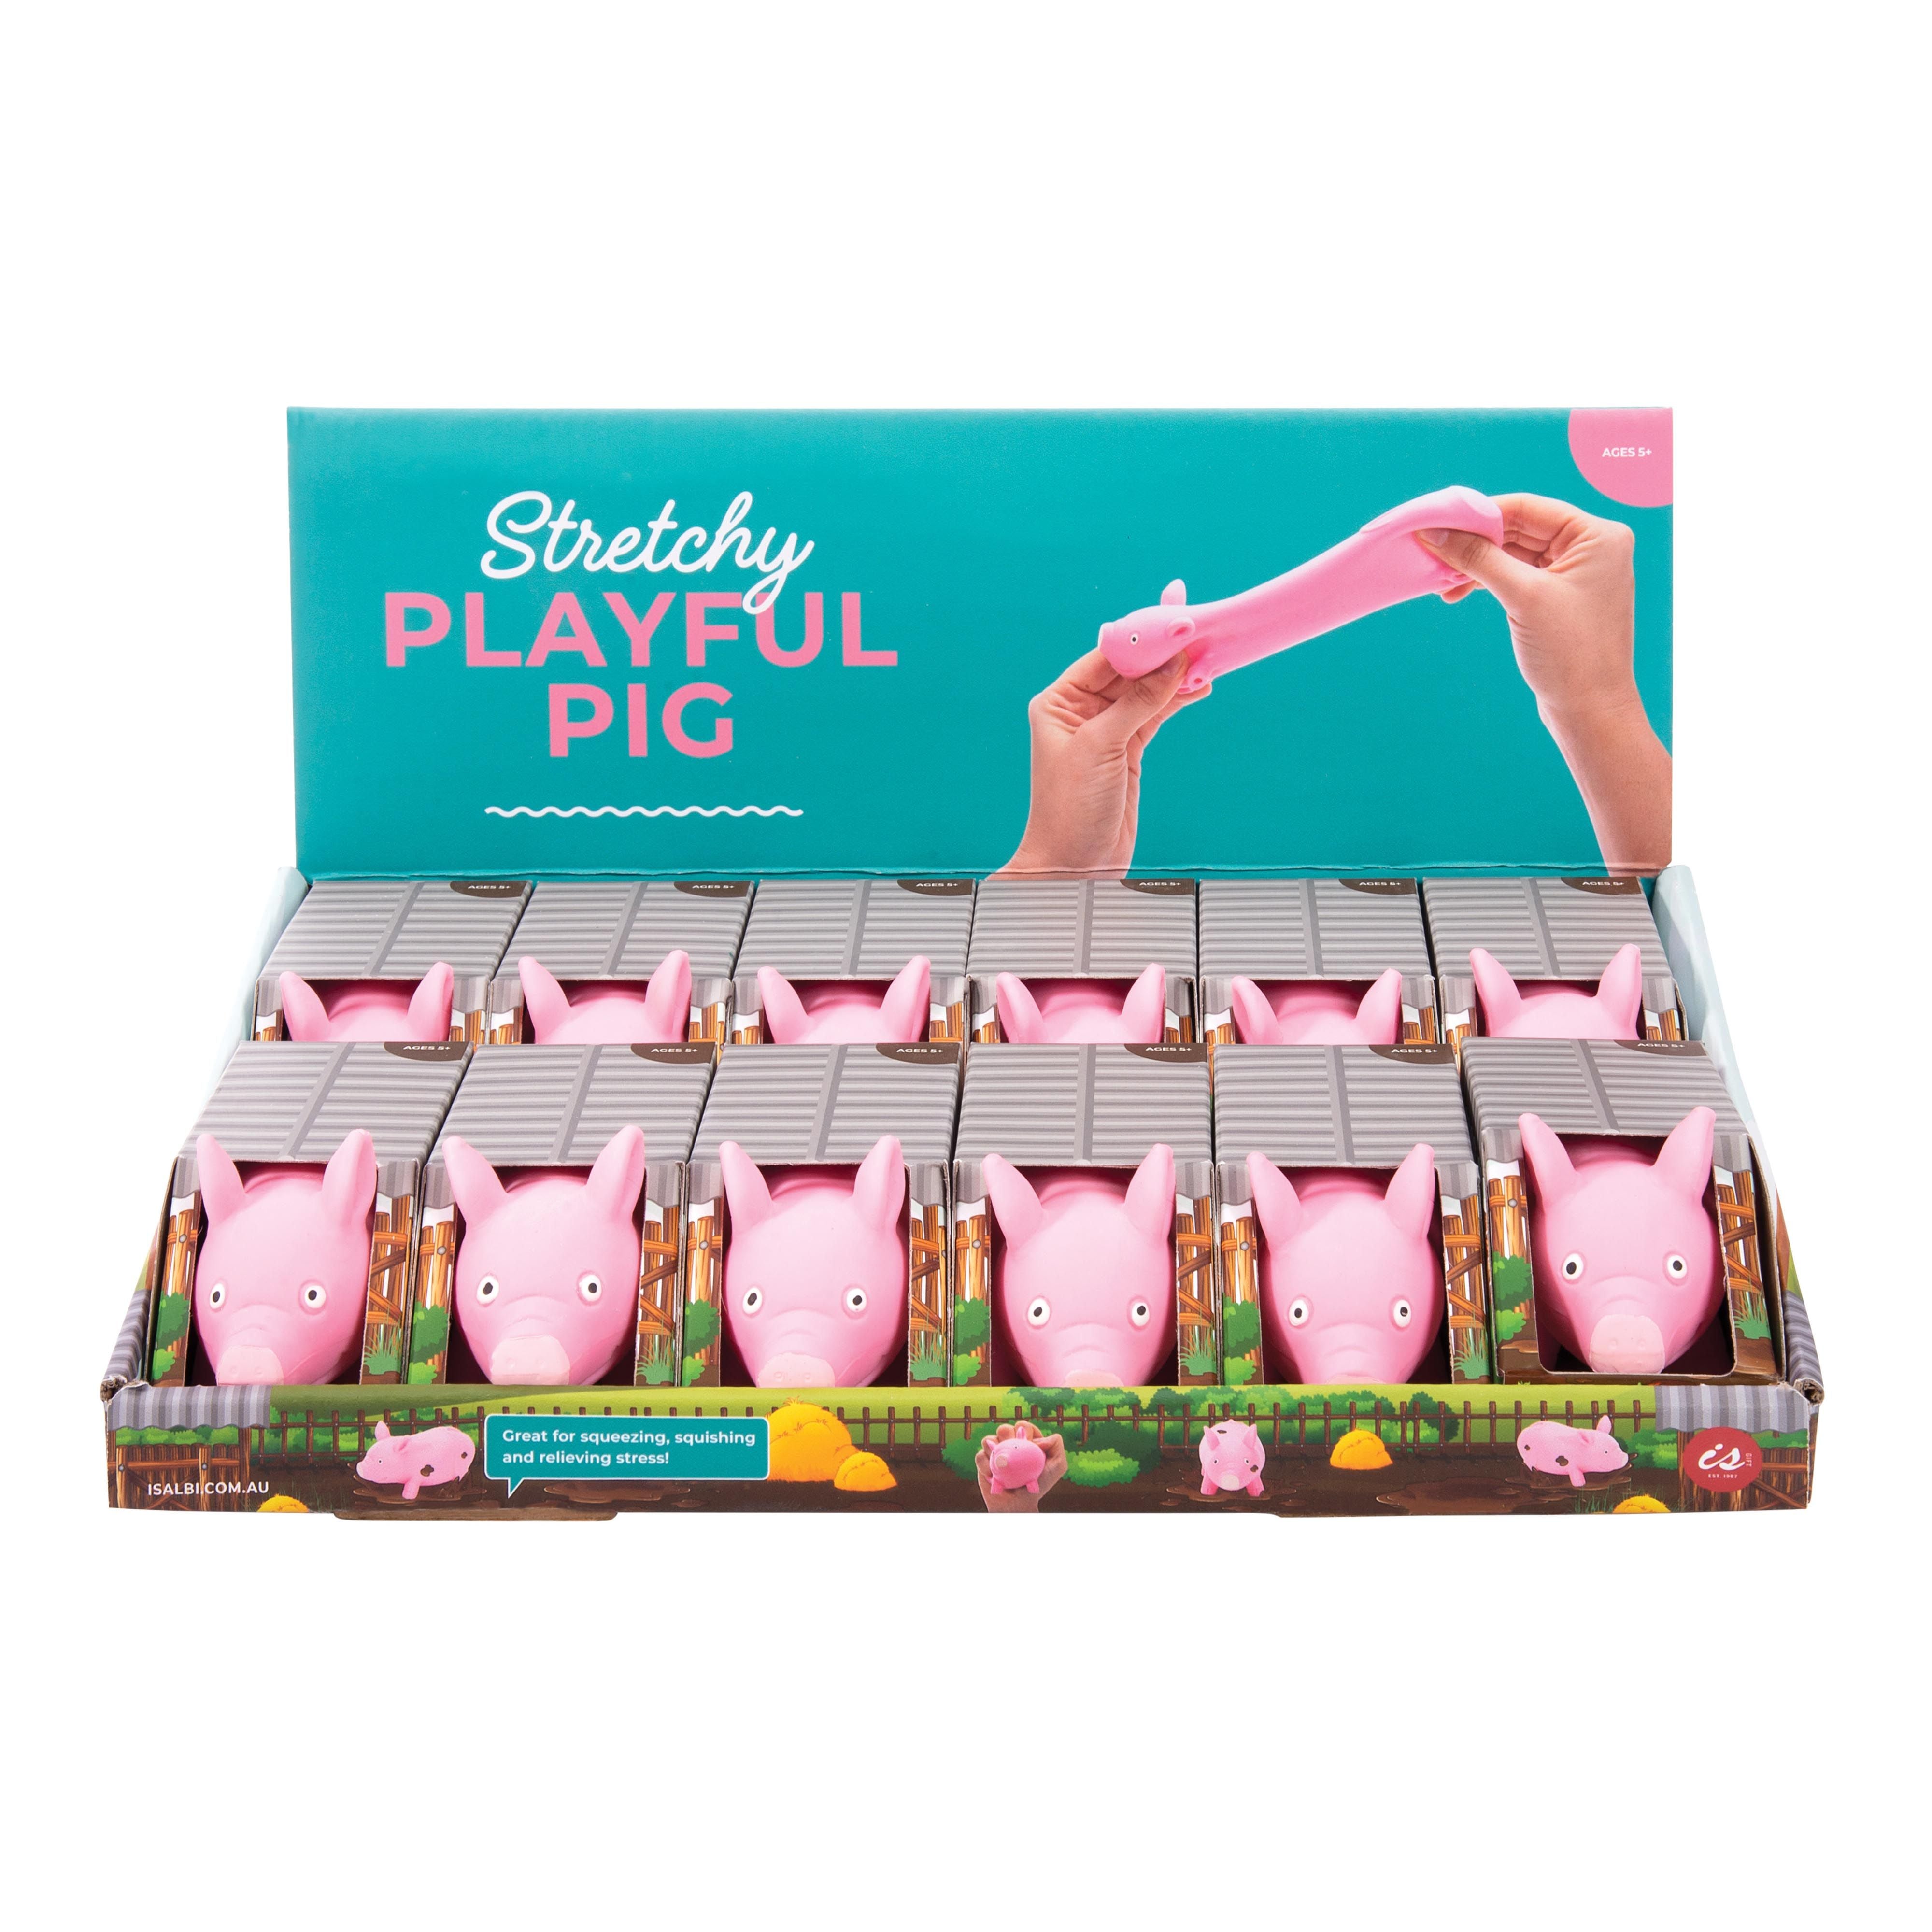 Stretchy Playful Pig-Toys-IS Gift-The Bay Room